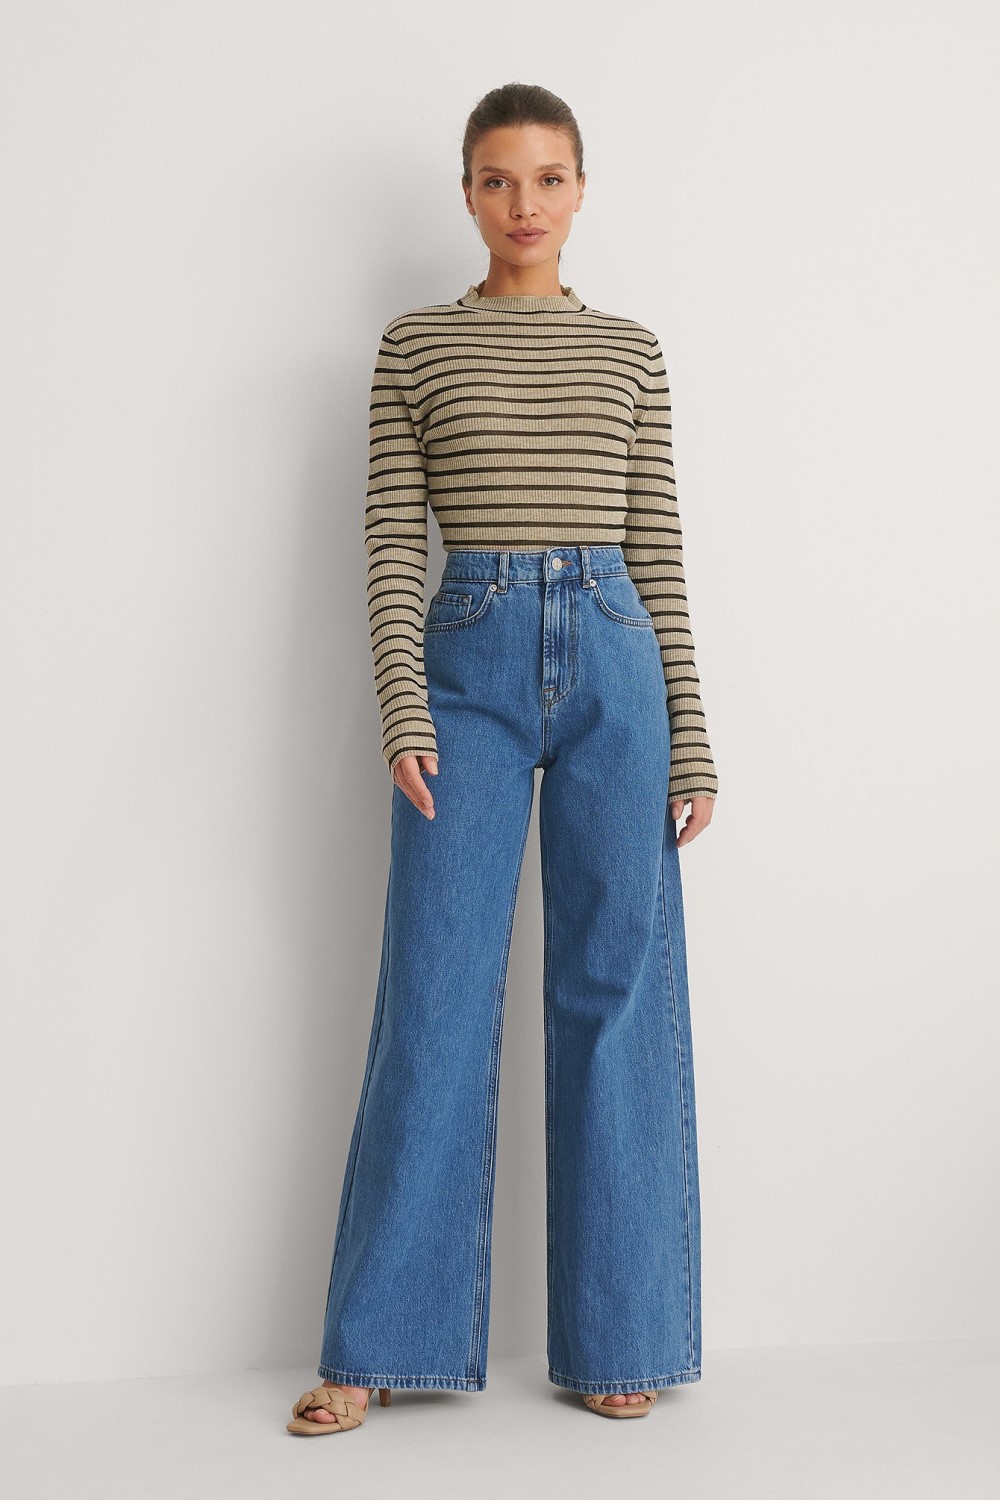 The Best Wide Leg Jeans For Spring 2021 - BLNCD BEAUTY